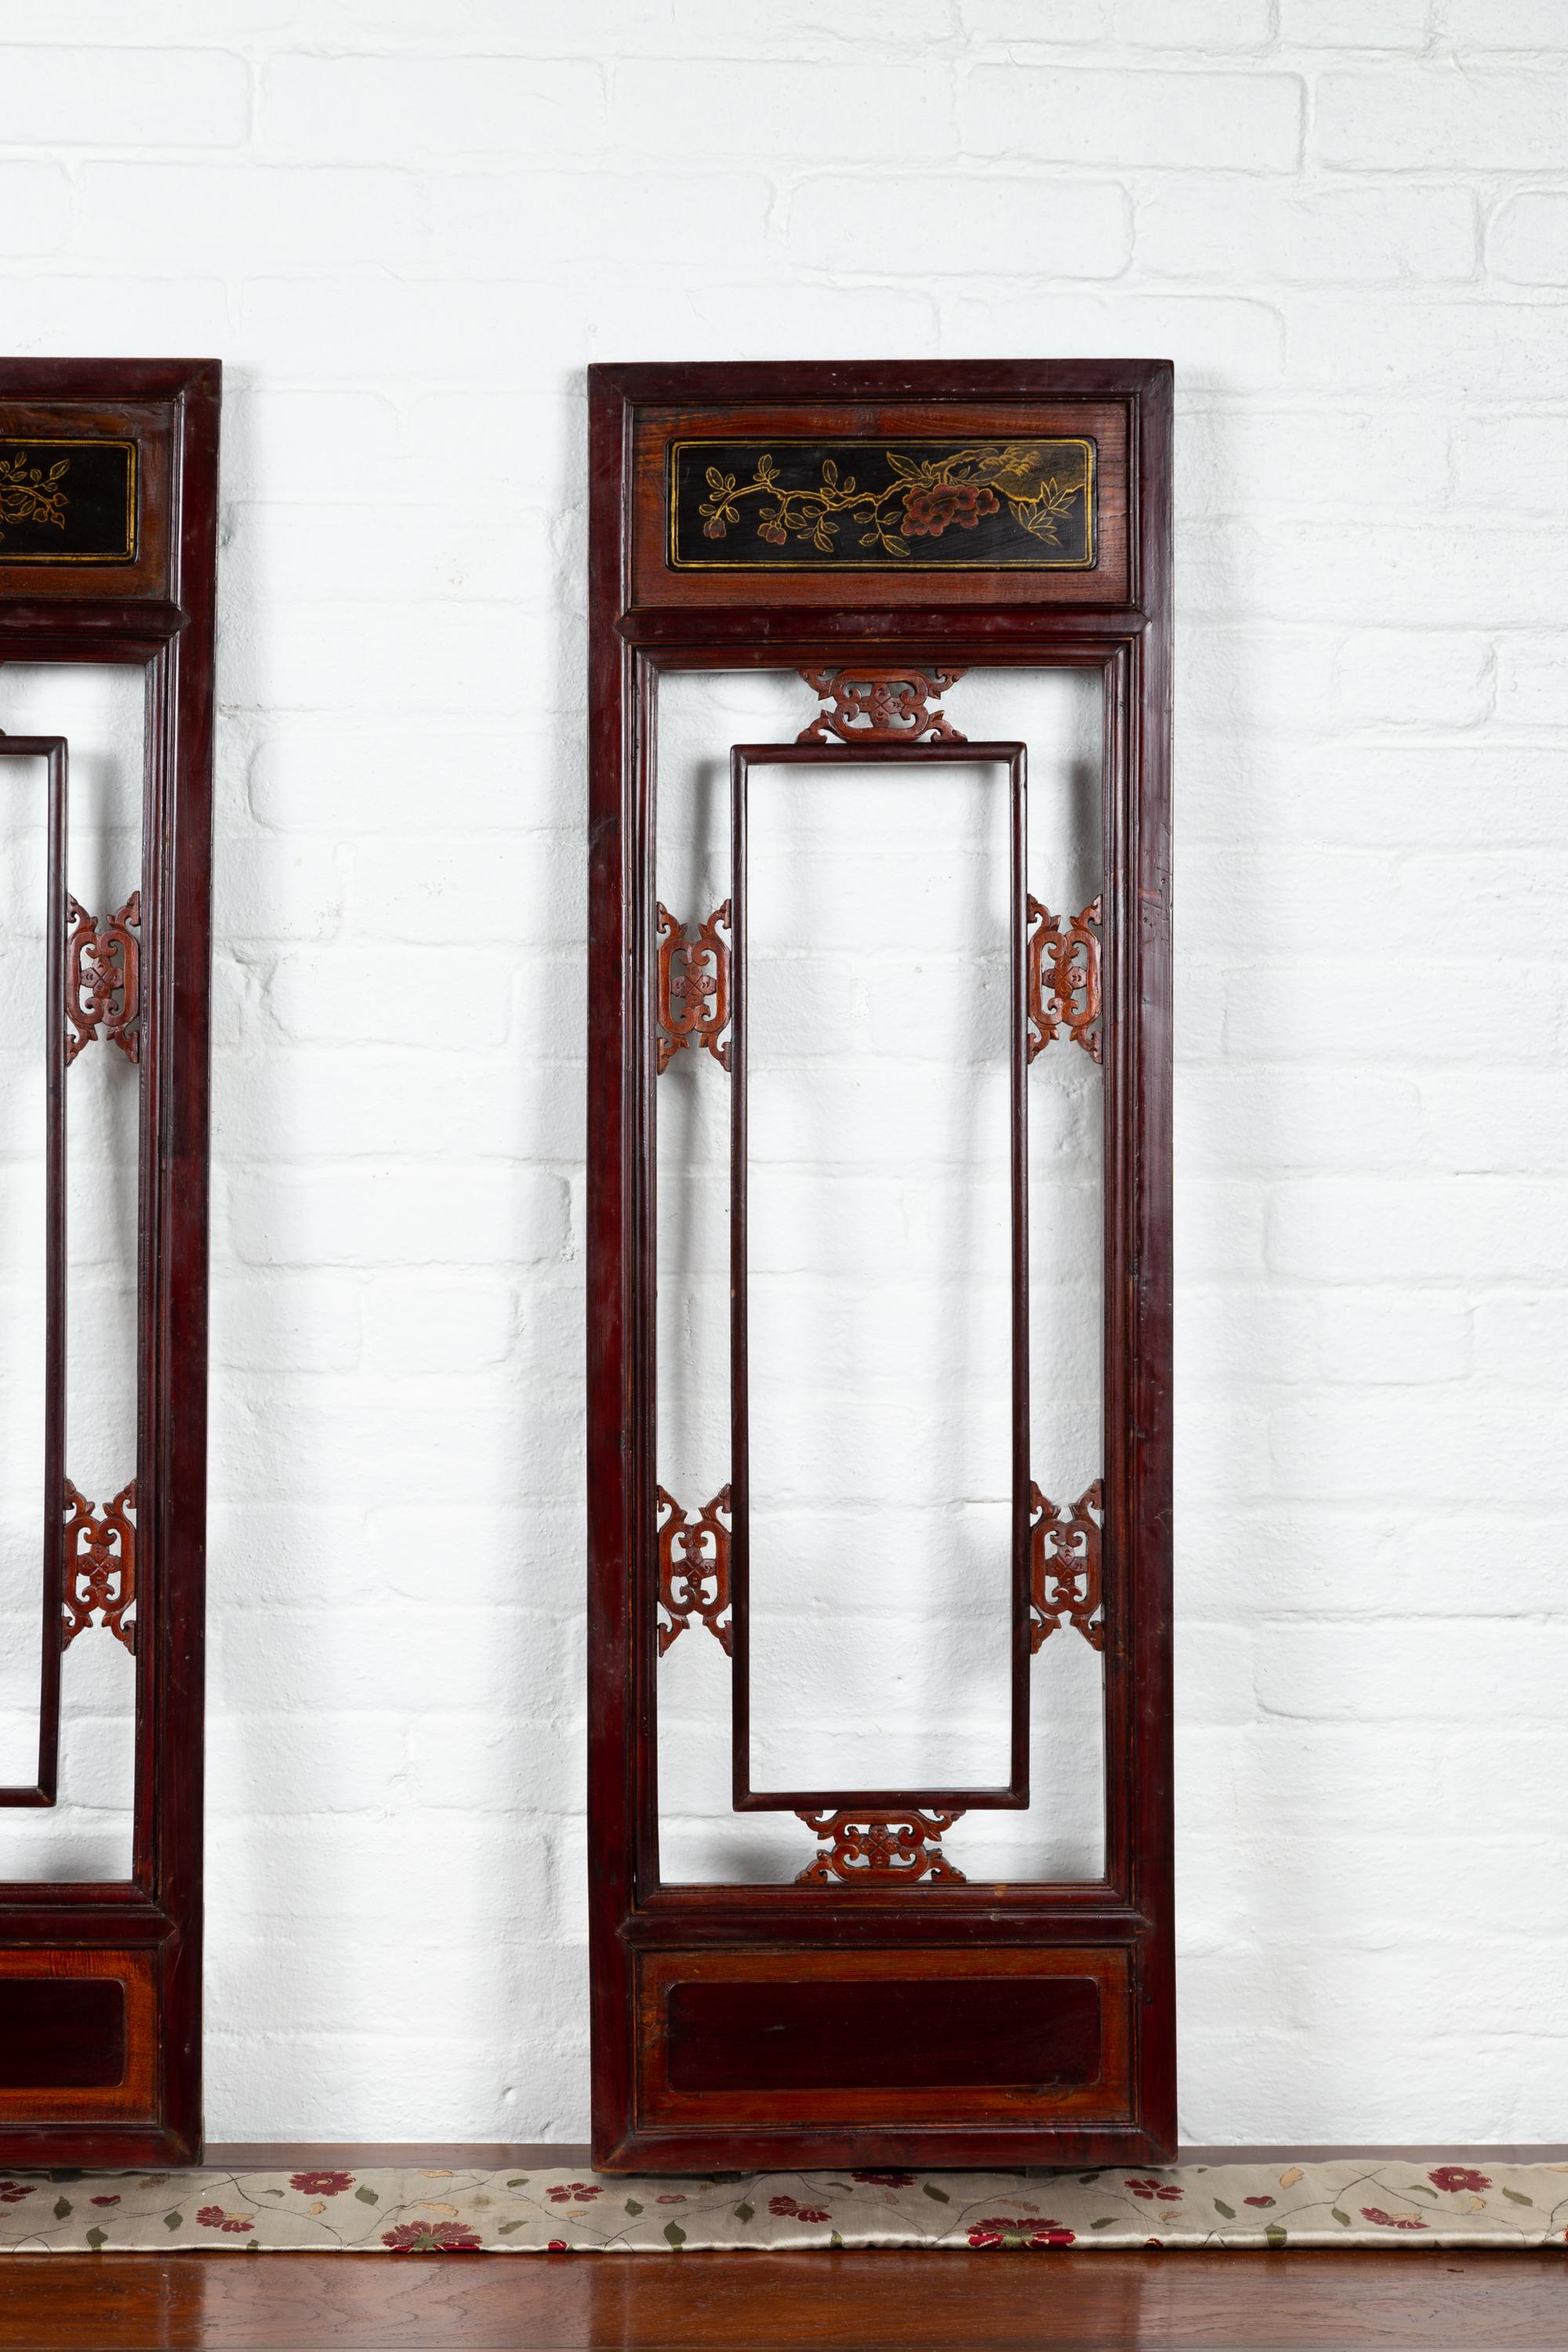 20th Century Pair of Chinese Antique Carved Wooden Panels with Red, Brown and Golden Accents